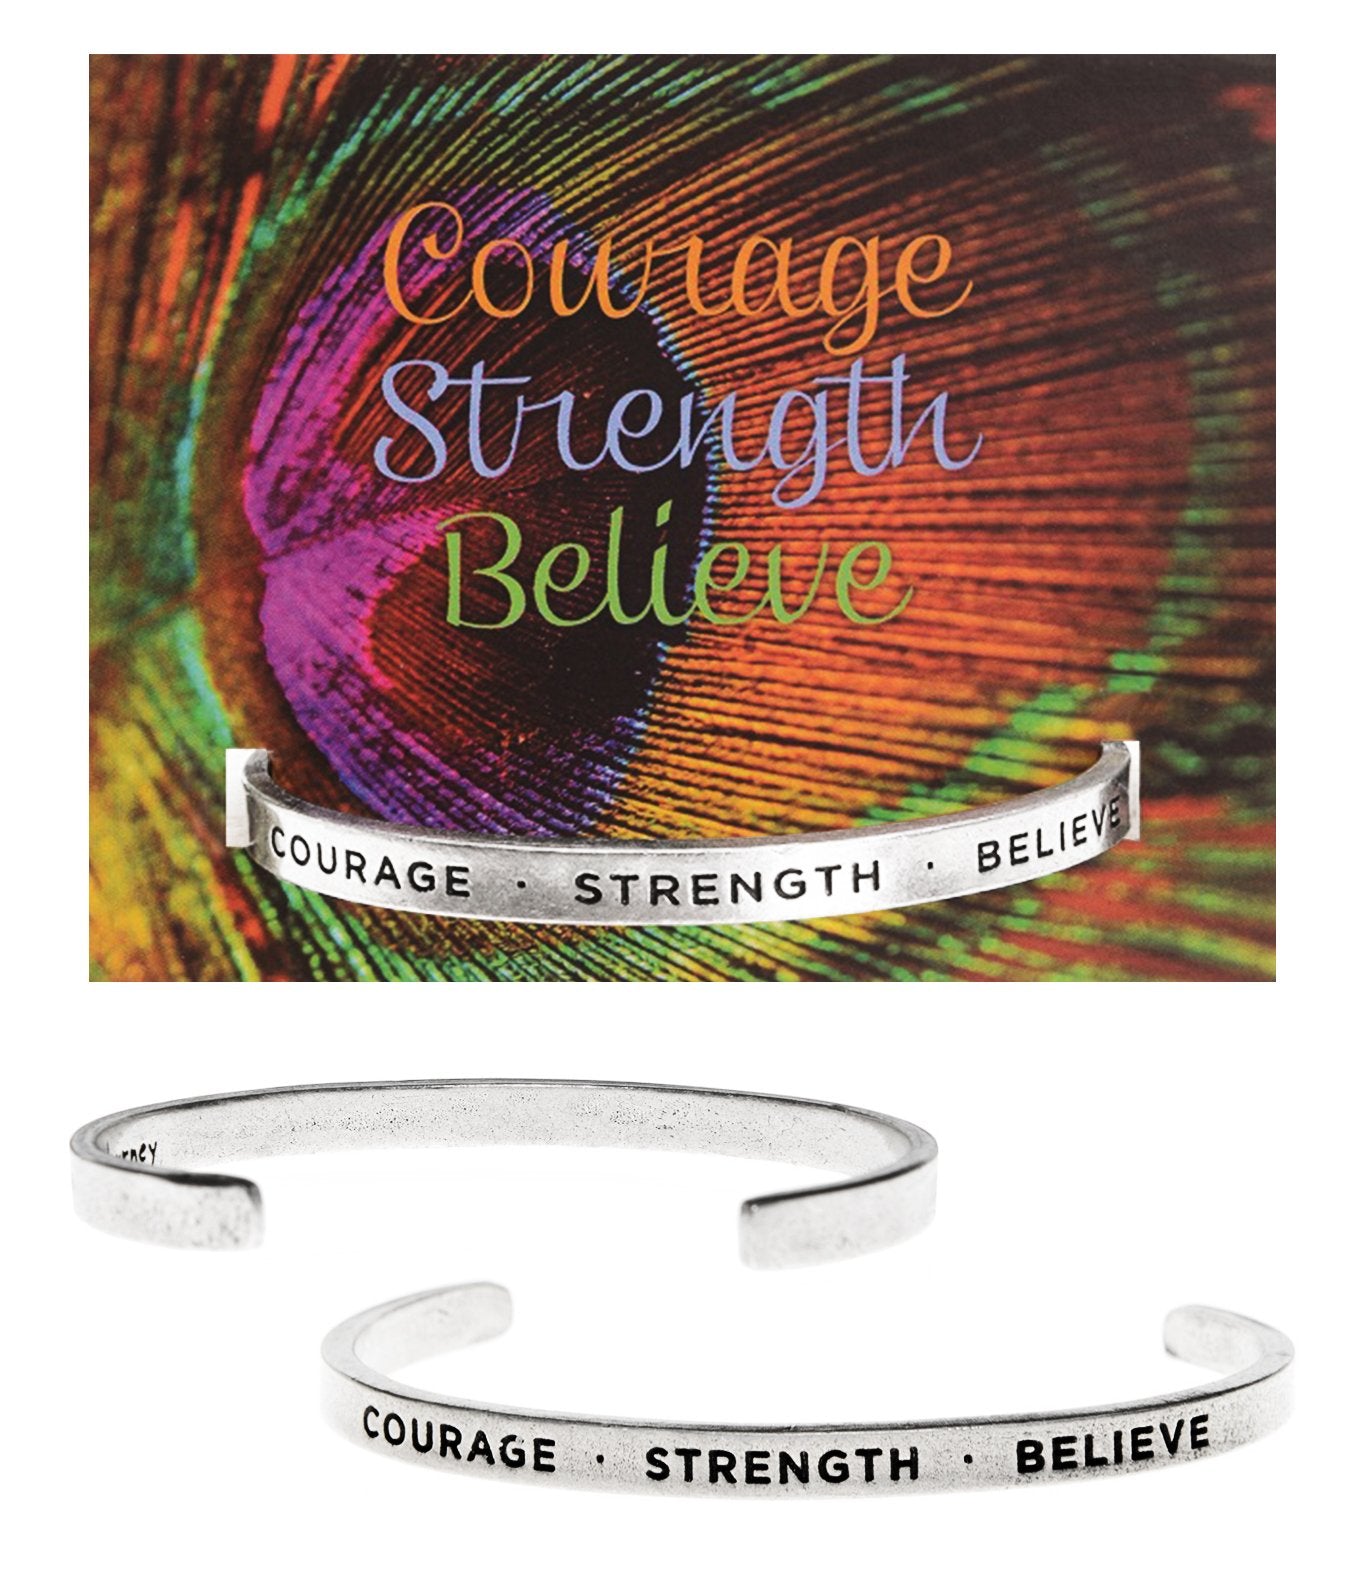 Courage, Strength, Believe Quotable Cuff on Courage, Strength, Believe Backer Card